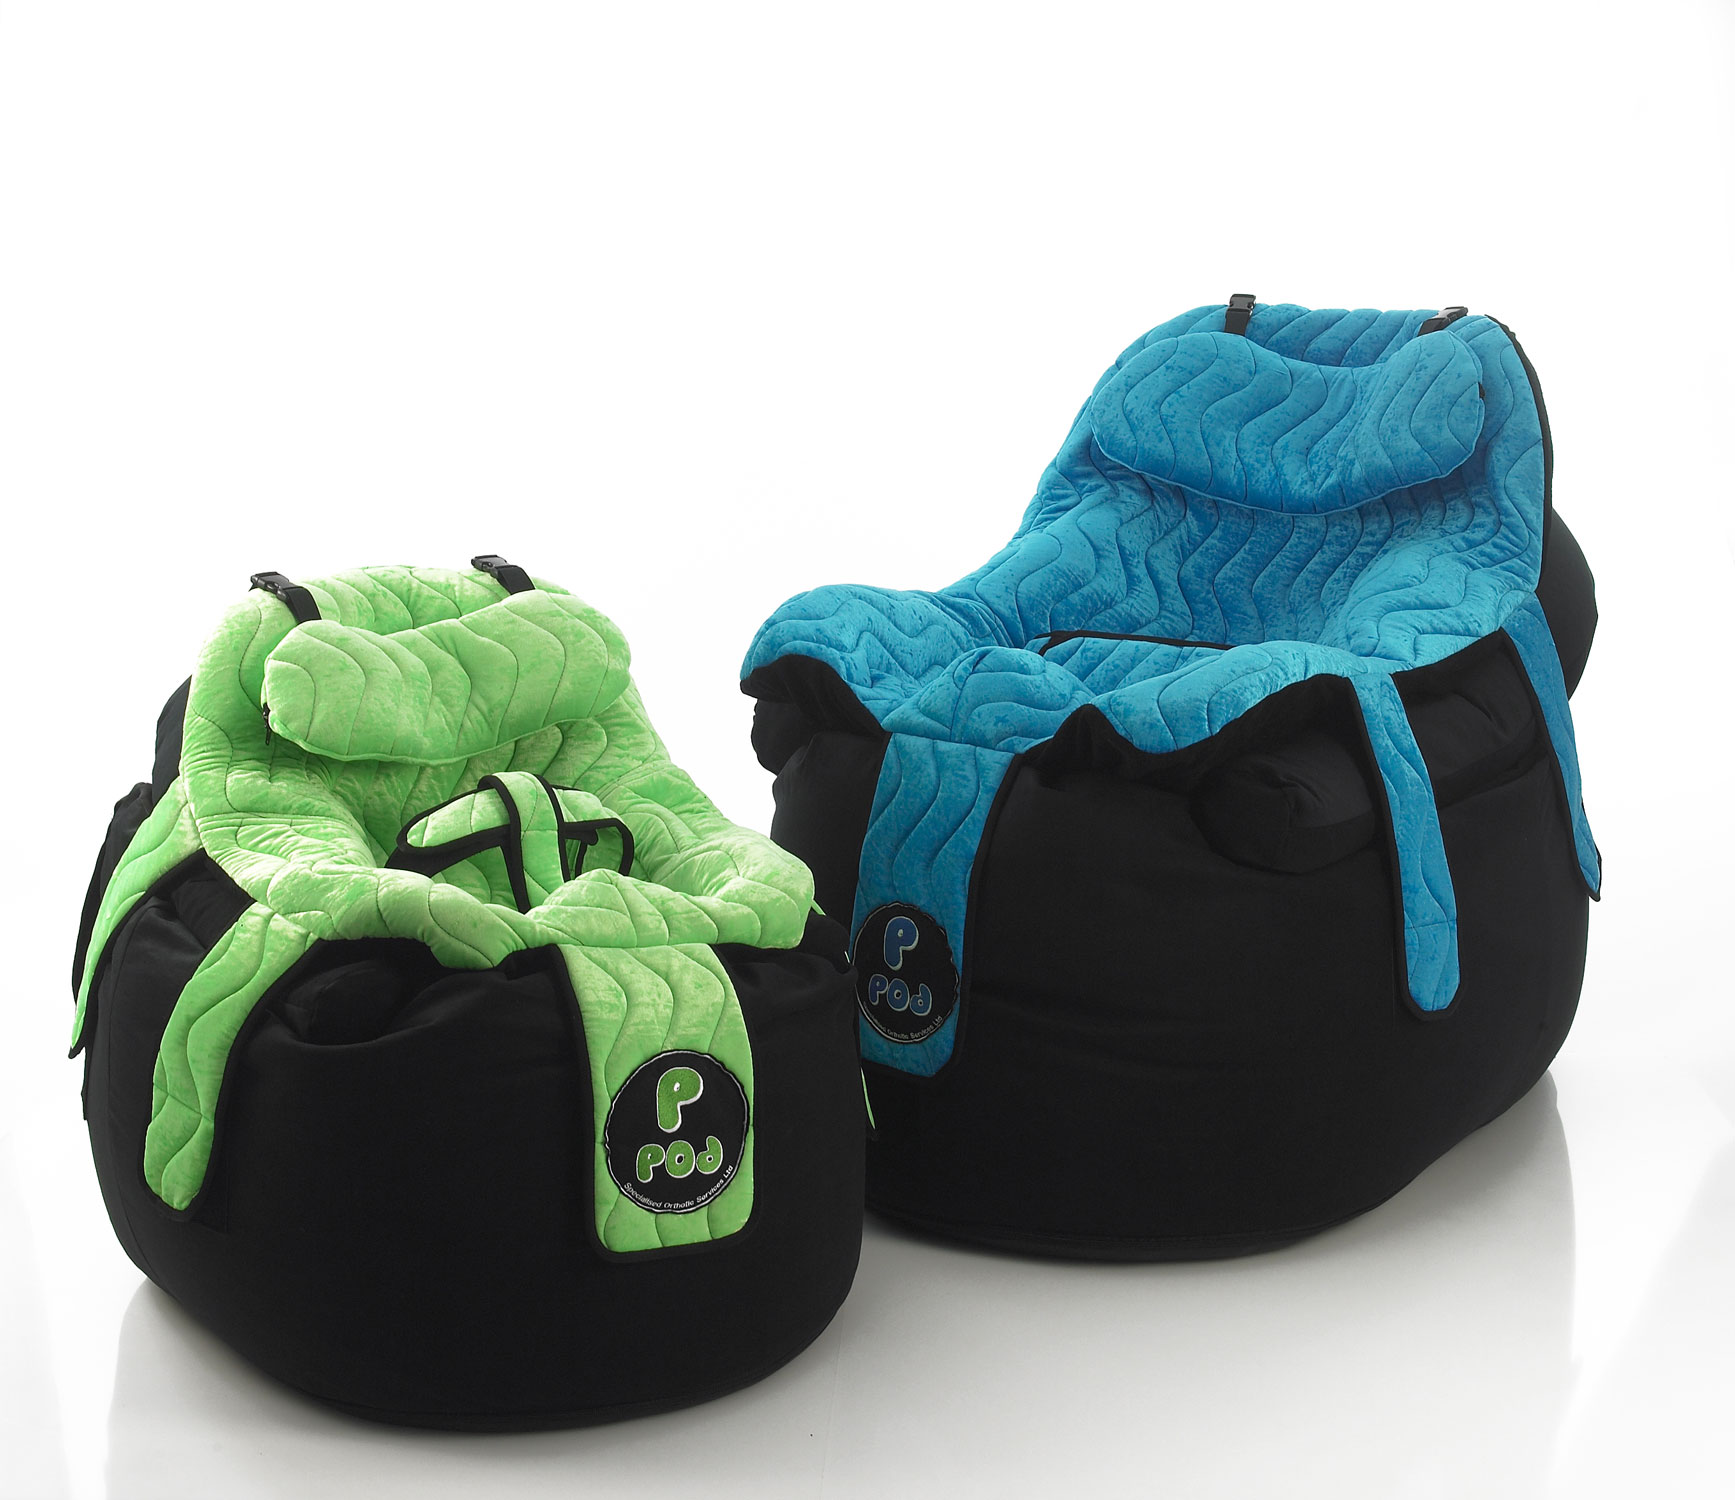 P Pod Bean Bag With Postural Support 2